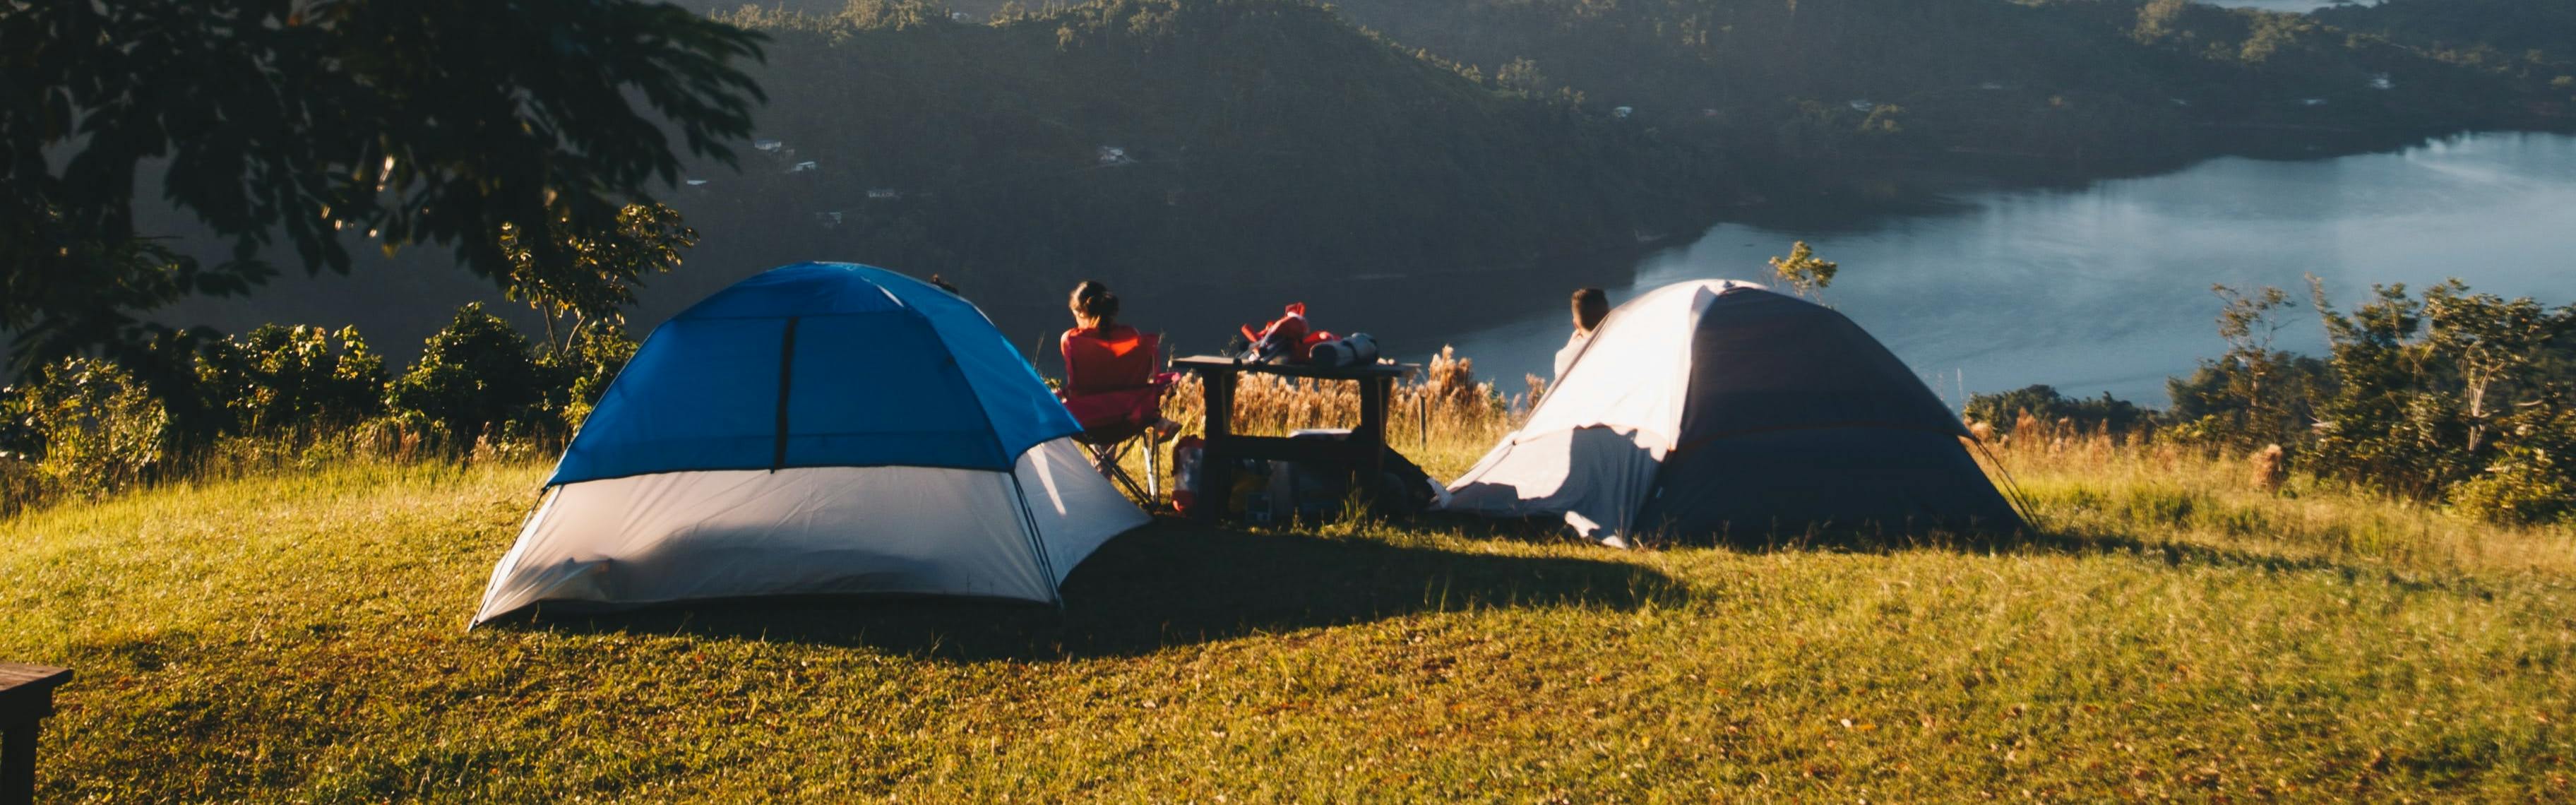 Two tents set up in a grassy field overlooking a body of water. There are two campers sitting outside the tents in camp chairs, and a camp table between the tents. 